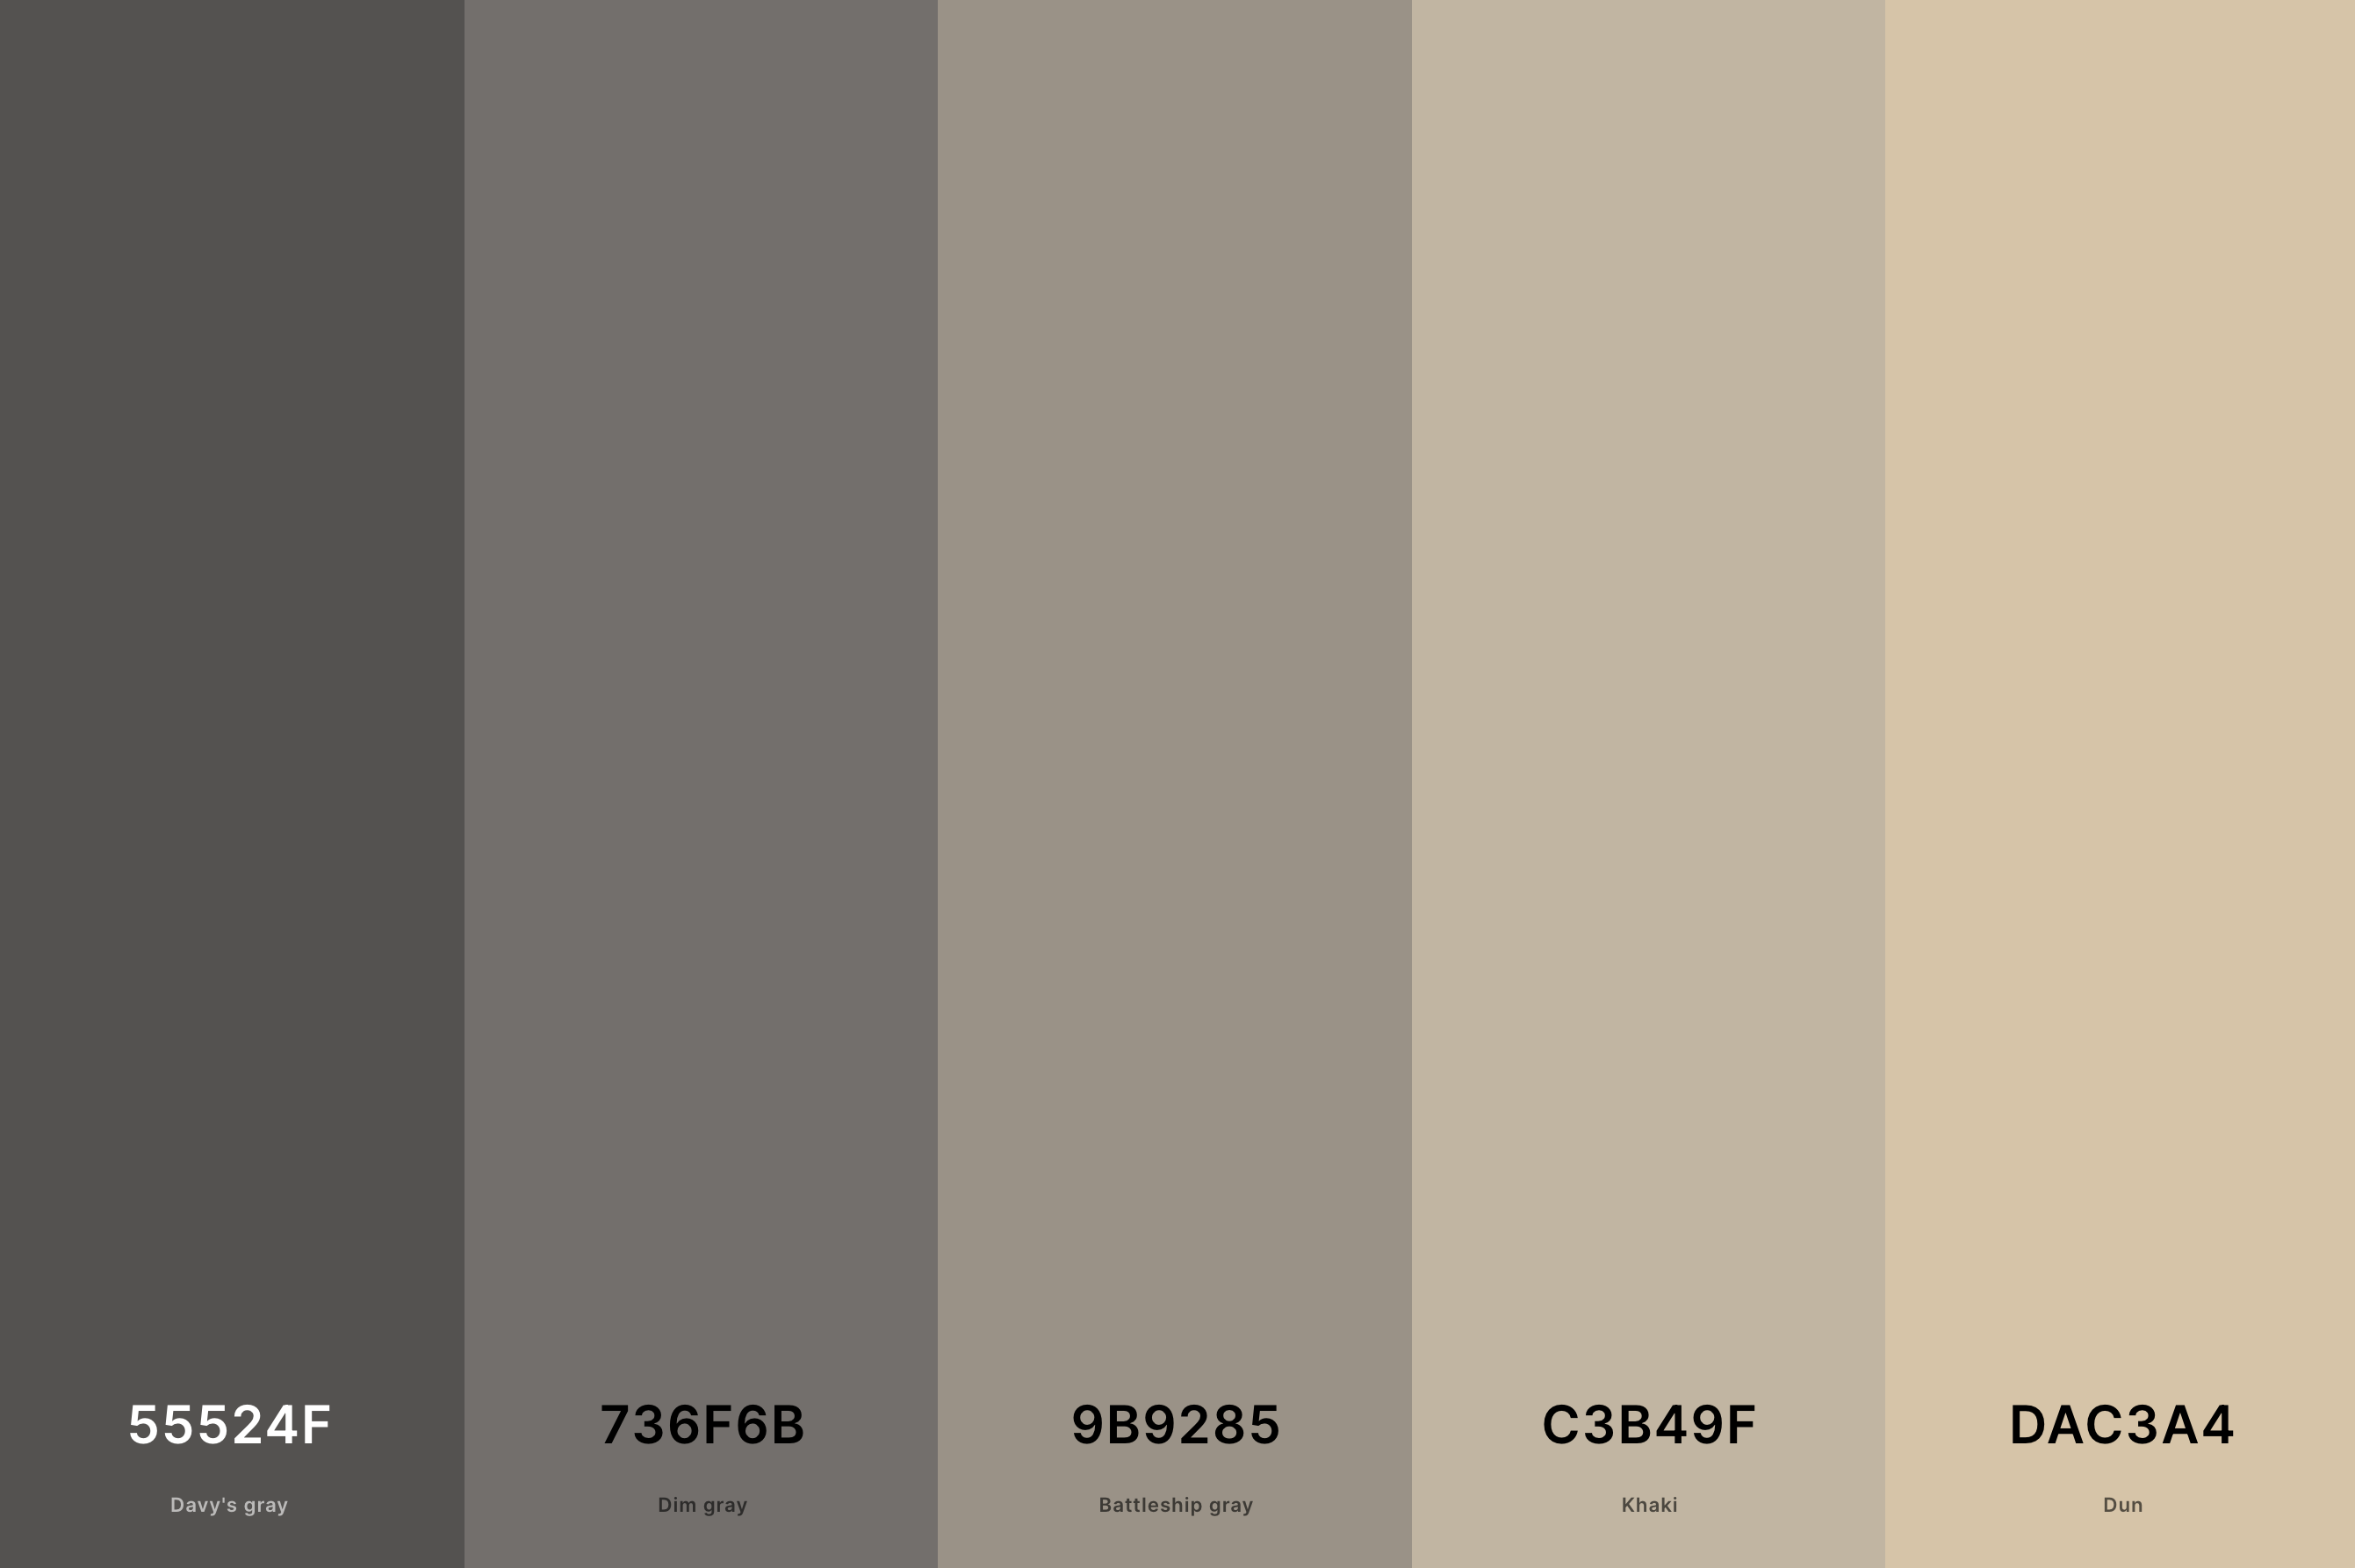 10. Gray And Tan Color Palette Color Palette with Davy'S Gray (Hex #55524F) + Dim Gray (Hex #736F6B) + Battleship Gray (Hex #9B9285) + Khaki (Hex #C3B49F) + Dun (Hex #DAC3A4) Color Palette with Hex Codes